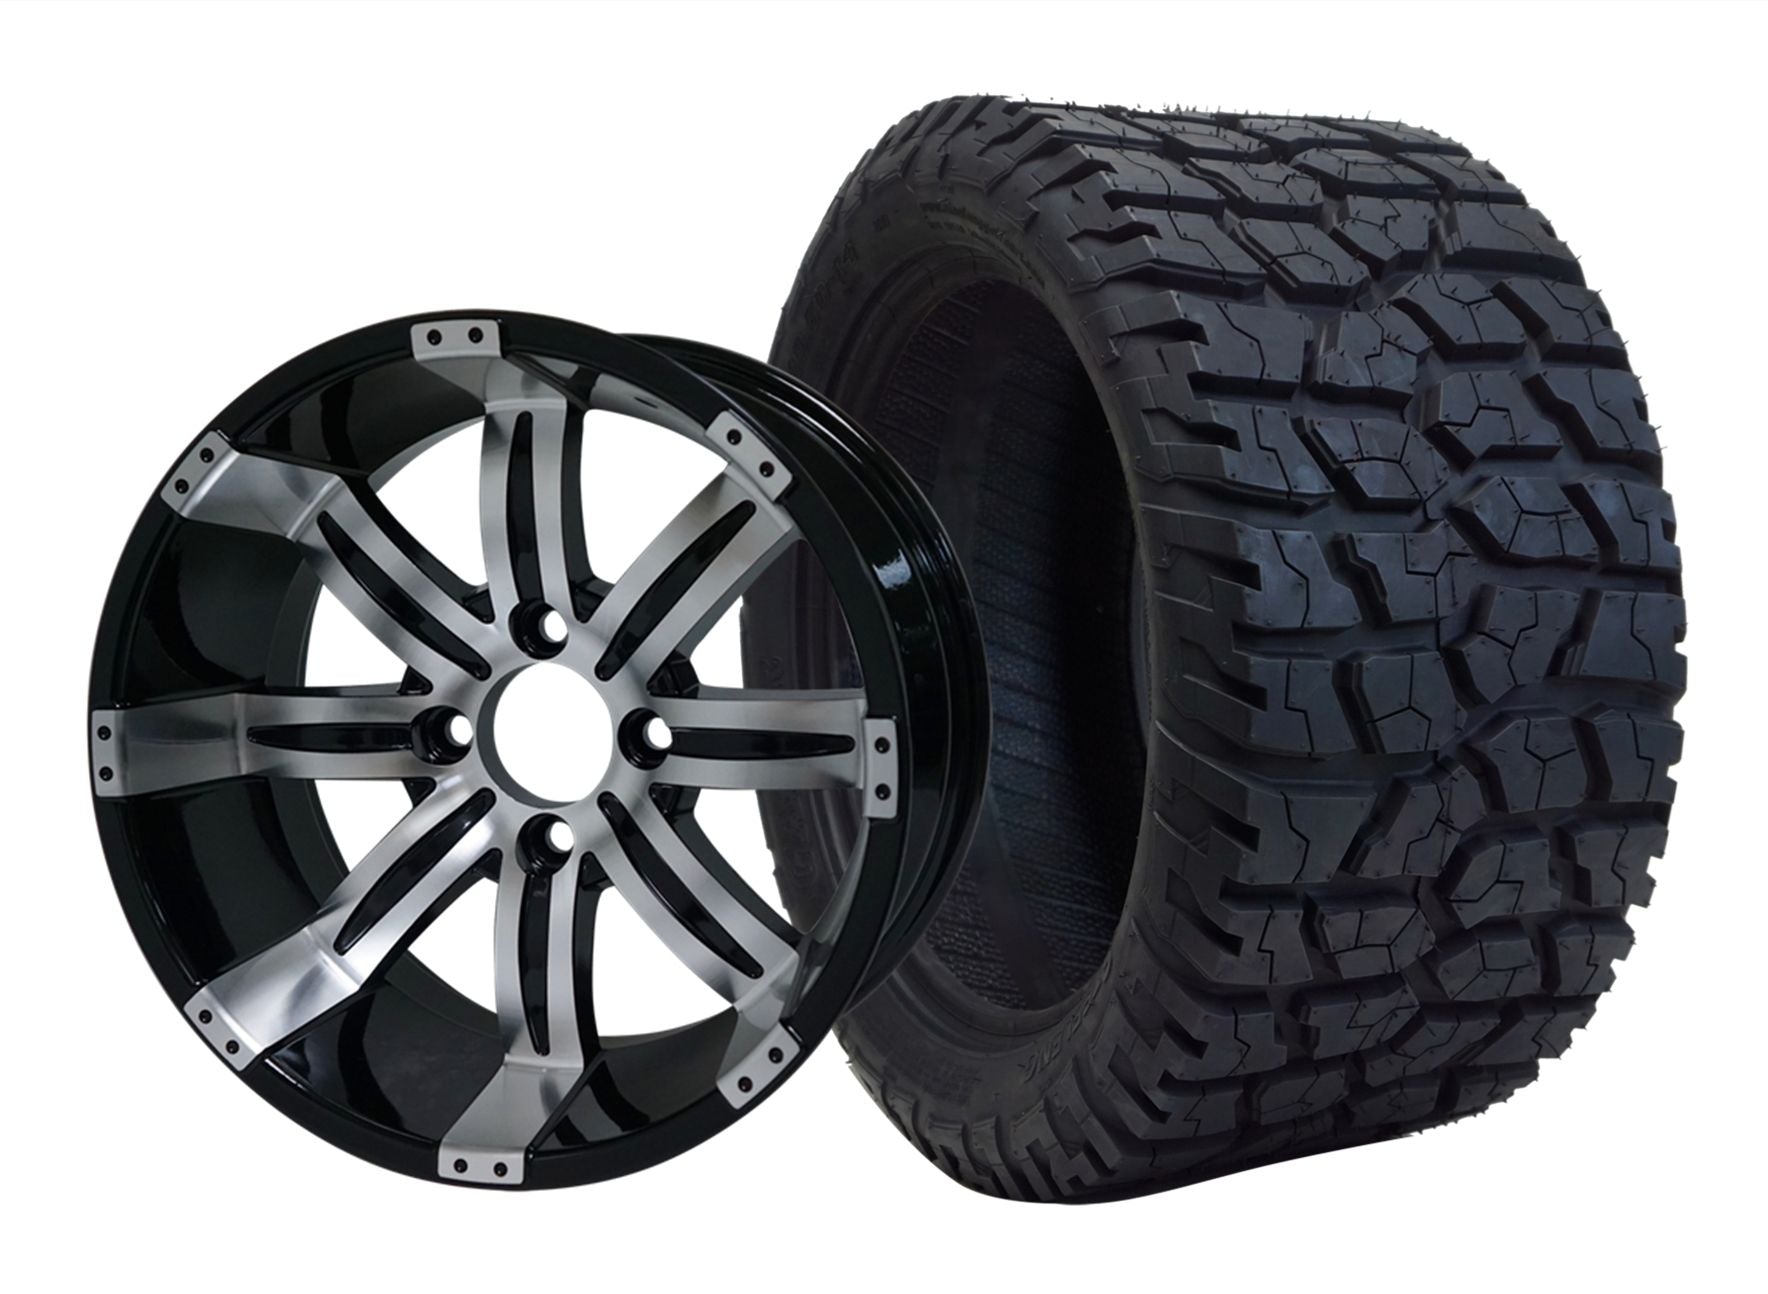 SGC 14" x 7" Tempest Machined/Black Wheel - Aluminum Alloy STEELENG 22"x10.5"-14" GATOR All Terrain Tire DOT Approved WH1406-TR1401